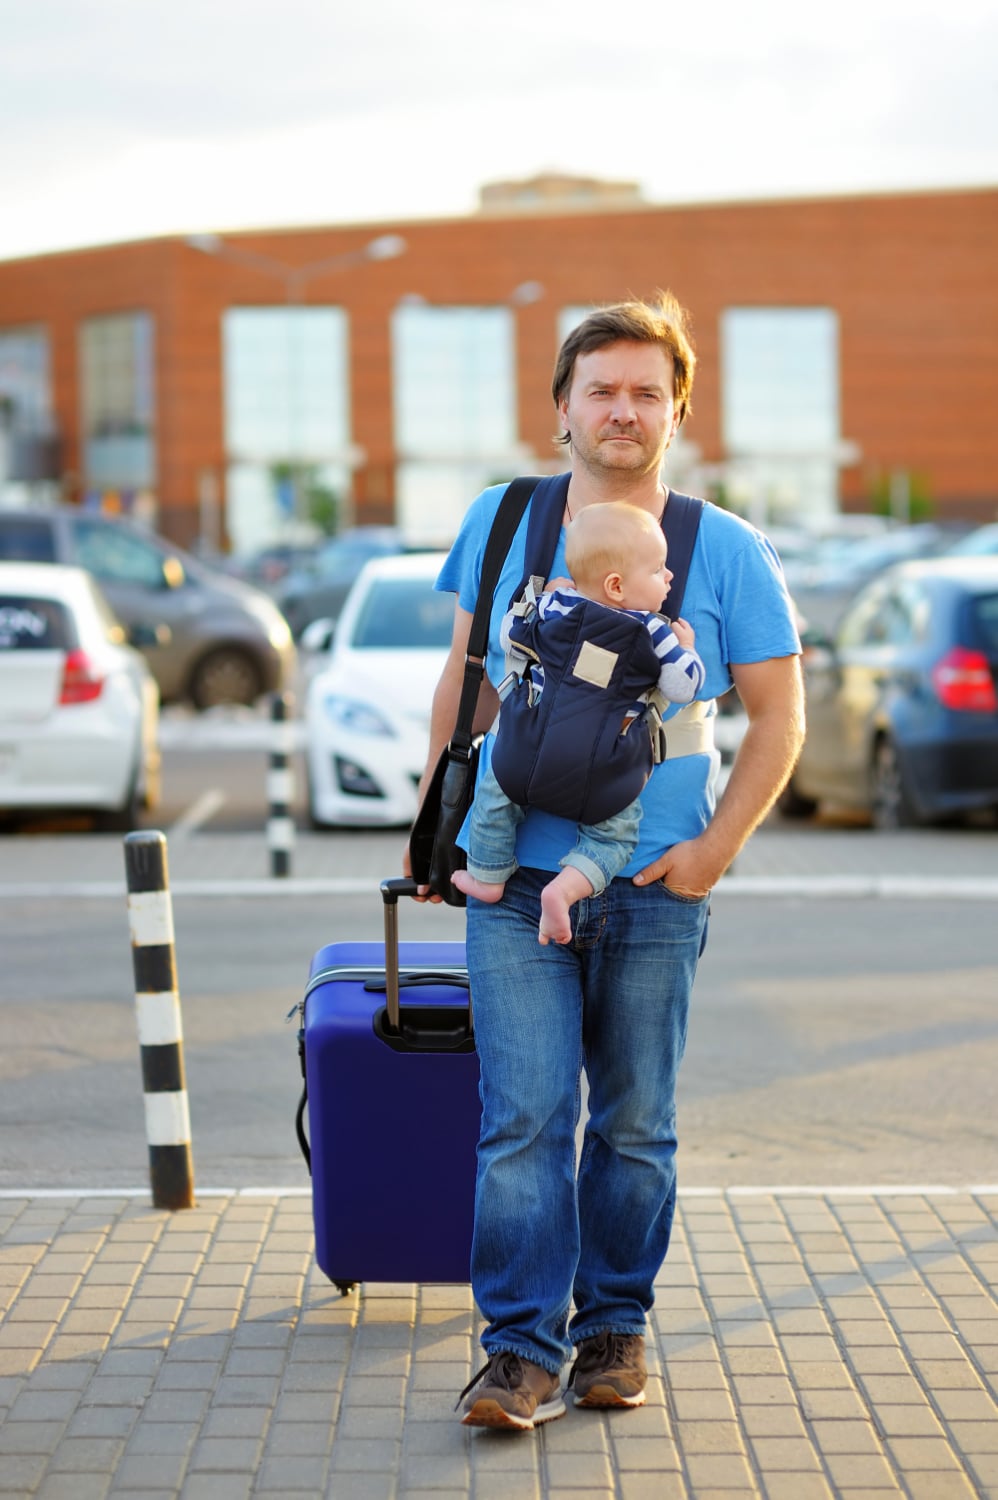 Baby and Toddler Travel: What You Need to Know Before Going